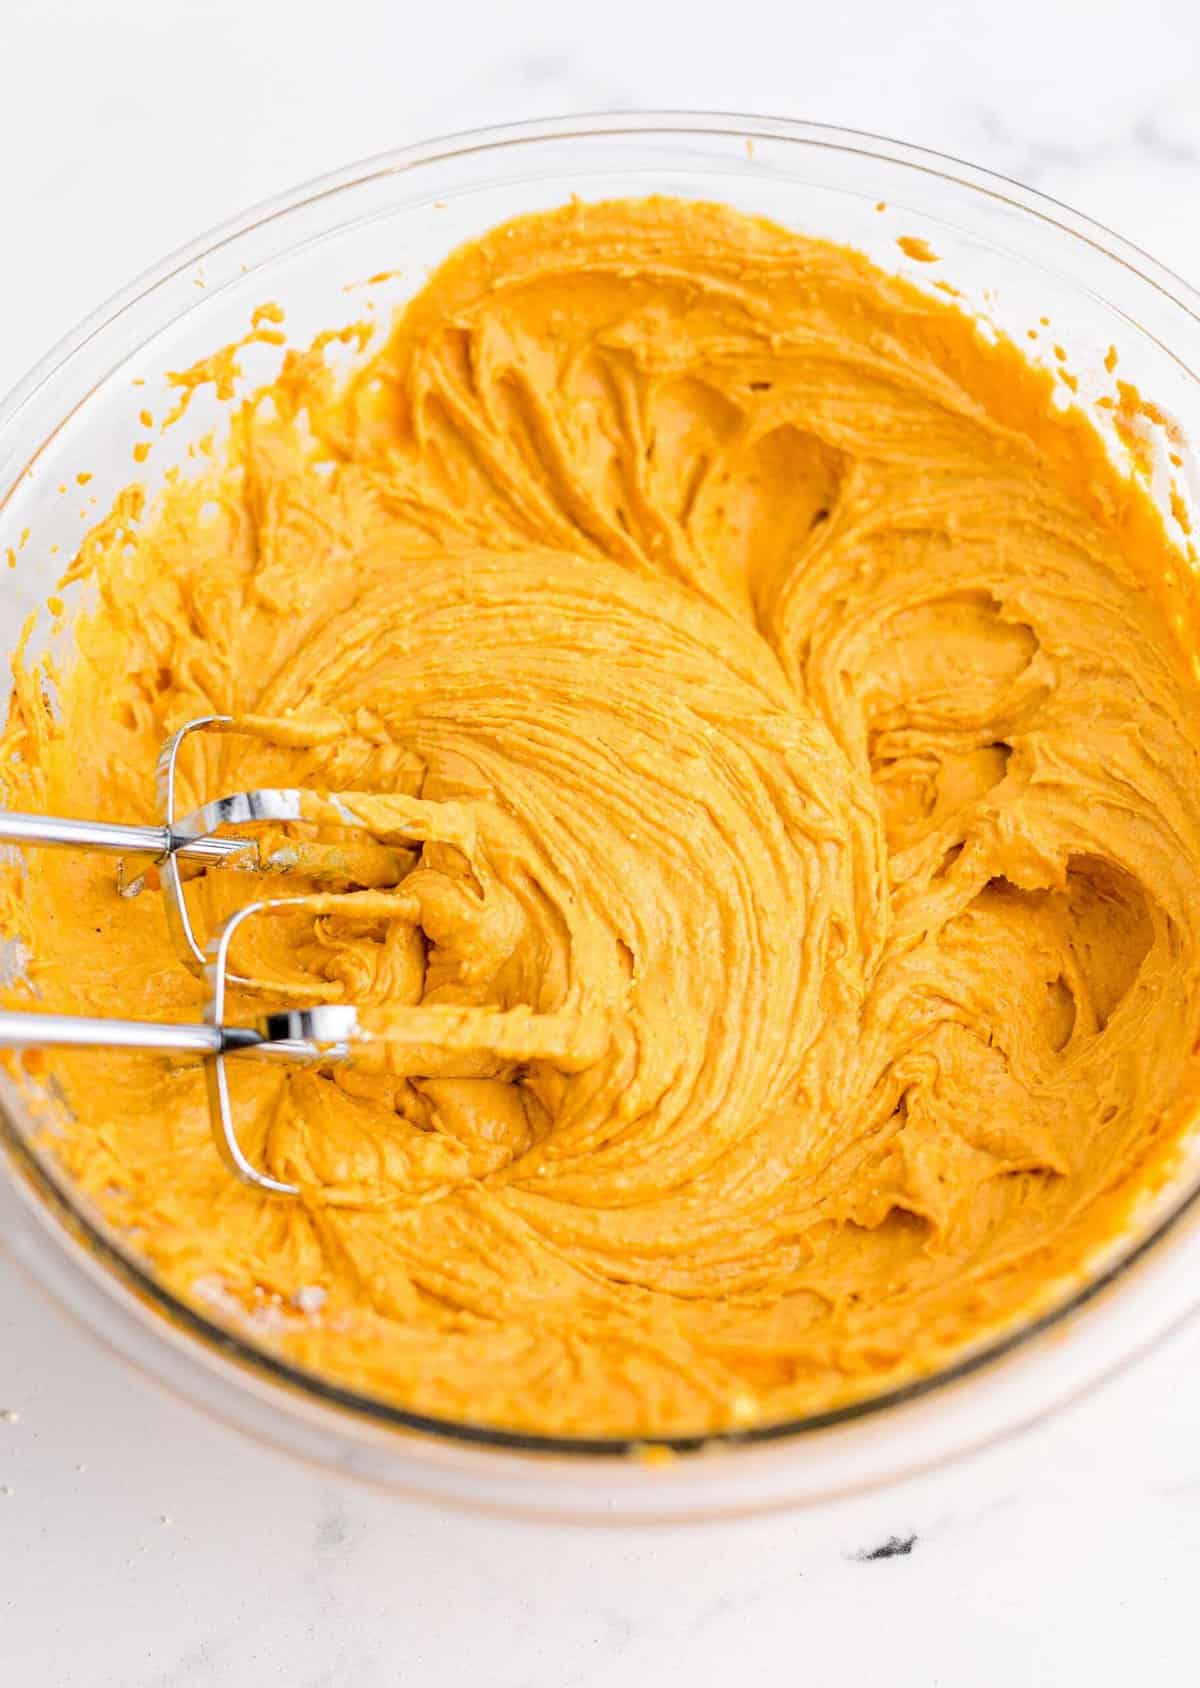 Pumpkin cake batter in a glass bowl with a whisk